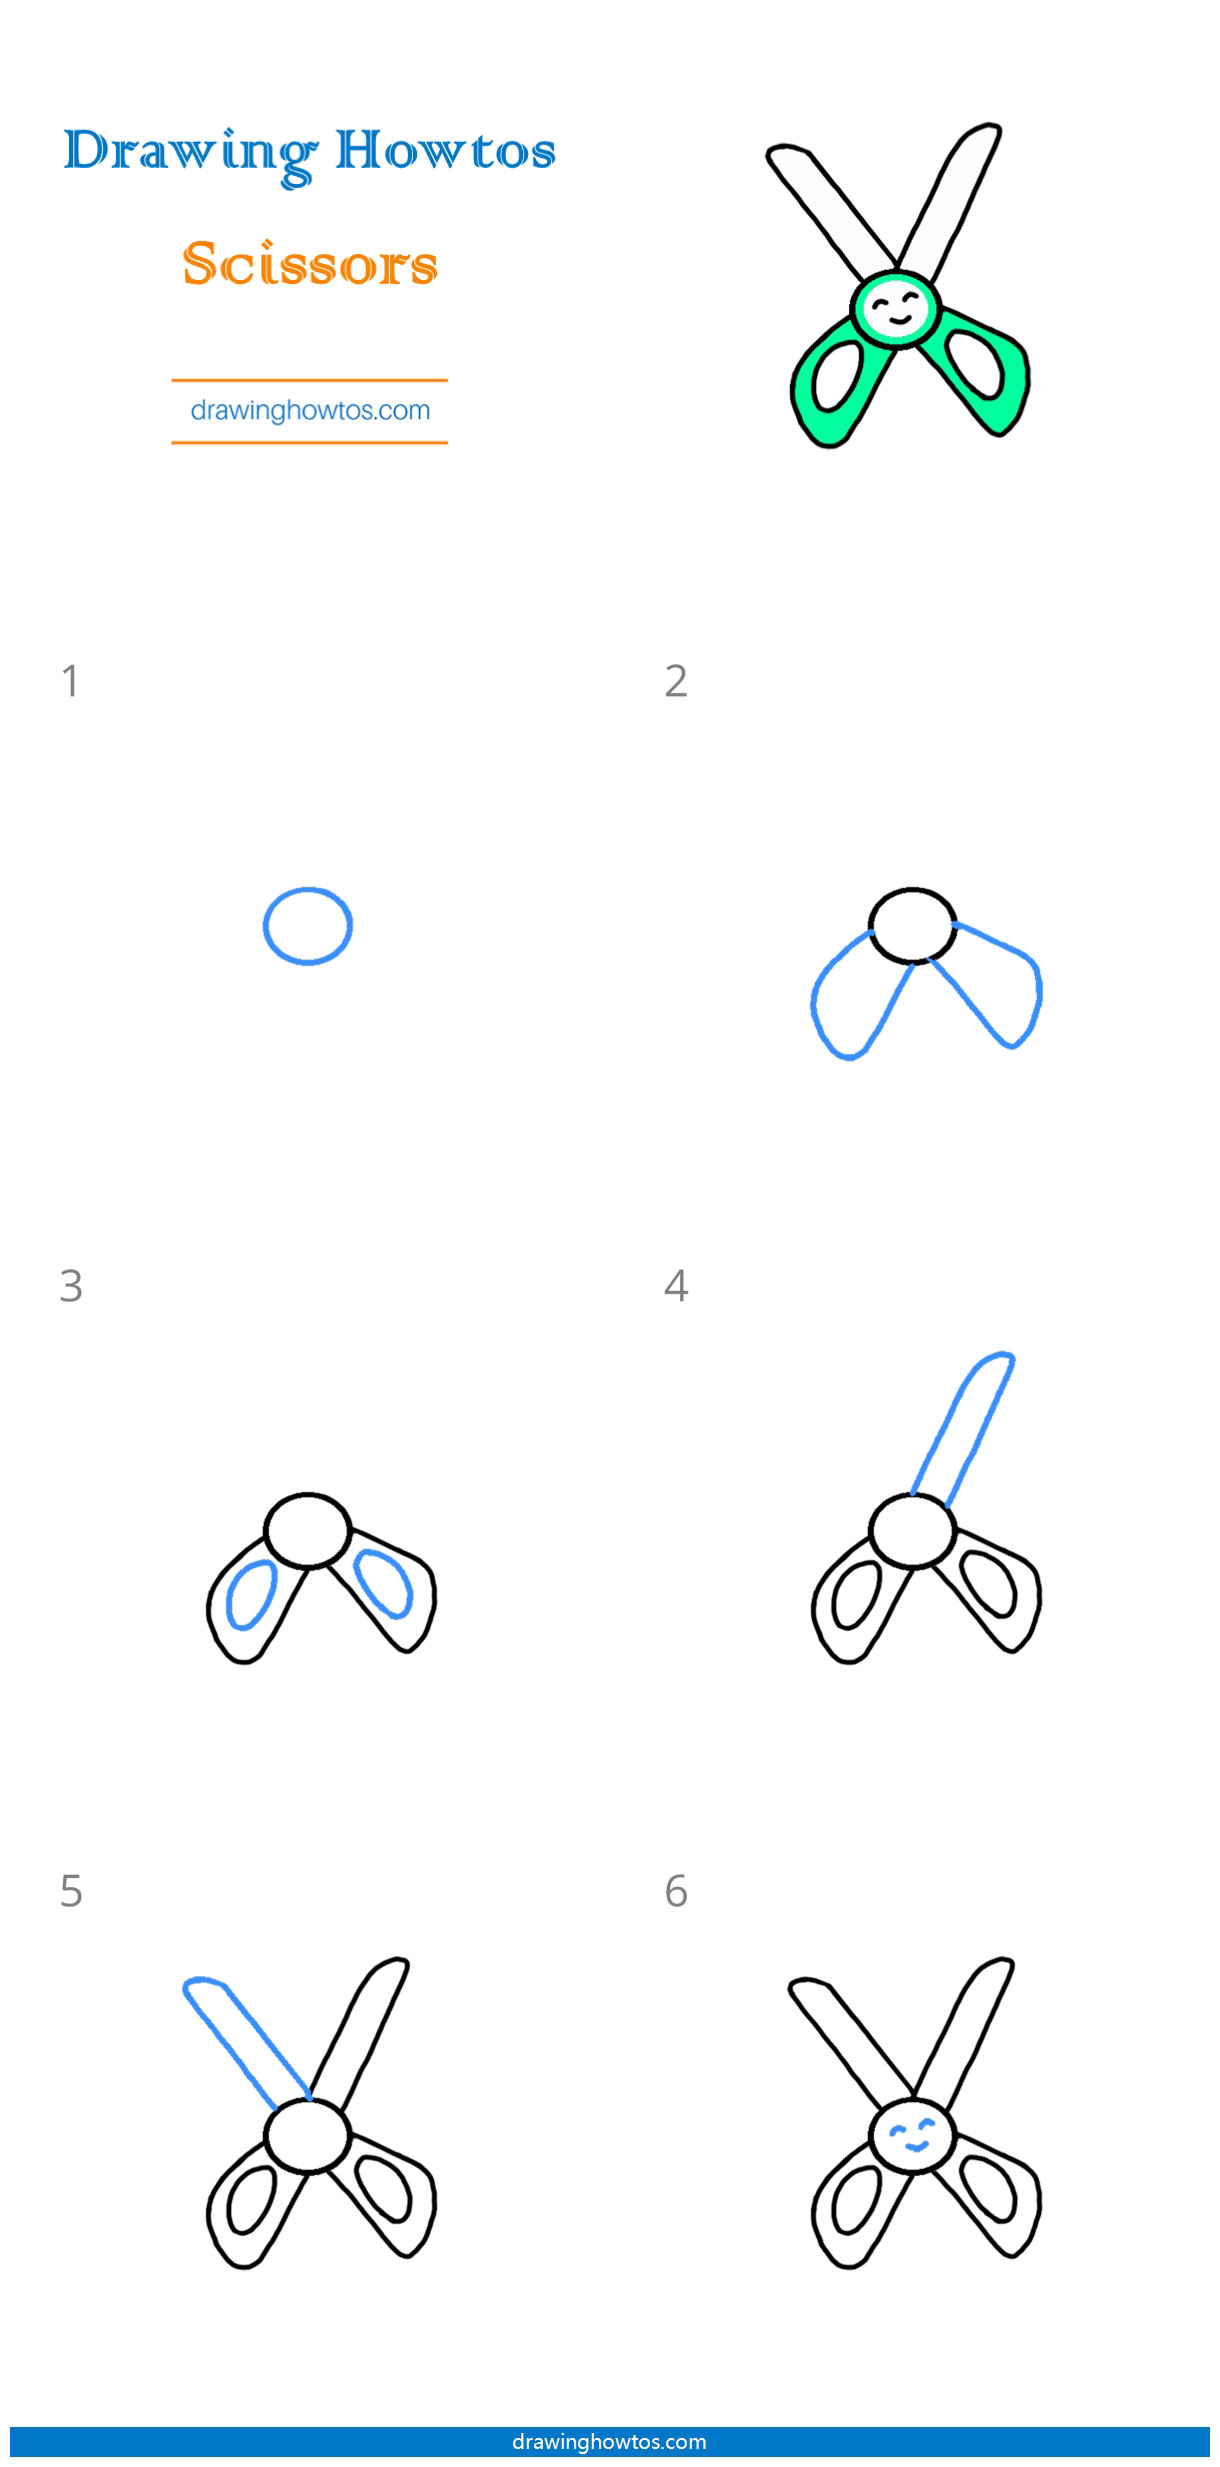 How to Draw Scissors Step by Step Easy Drawing Guides Drawing Howtos